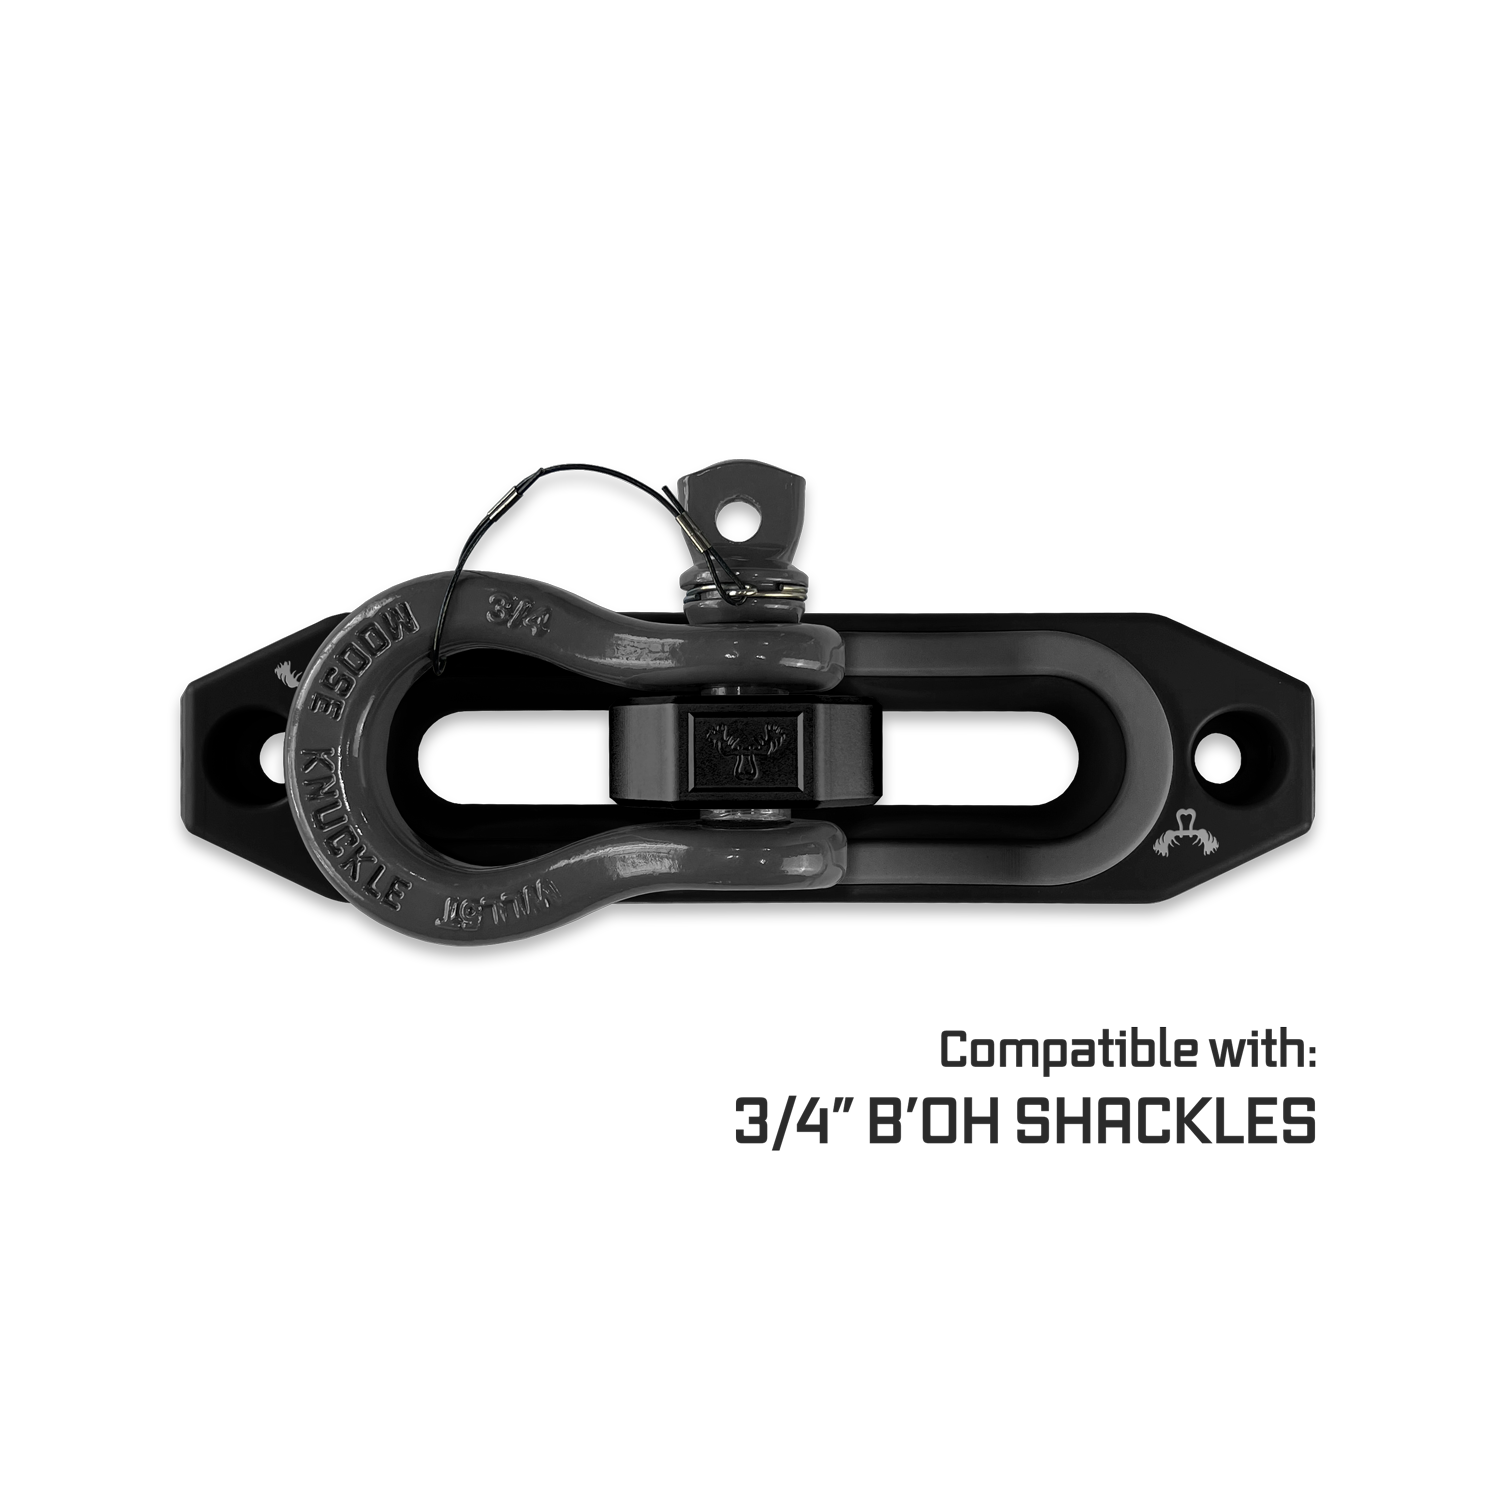 Jawse Fairlead and Front BOH Shackle in Black Lung and Gun Gray